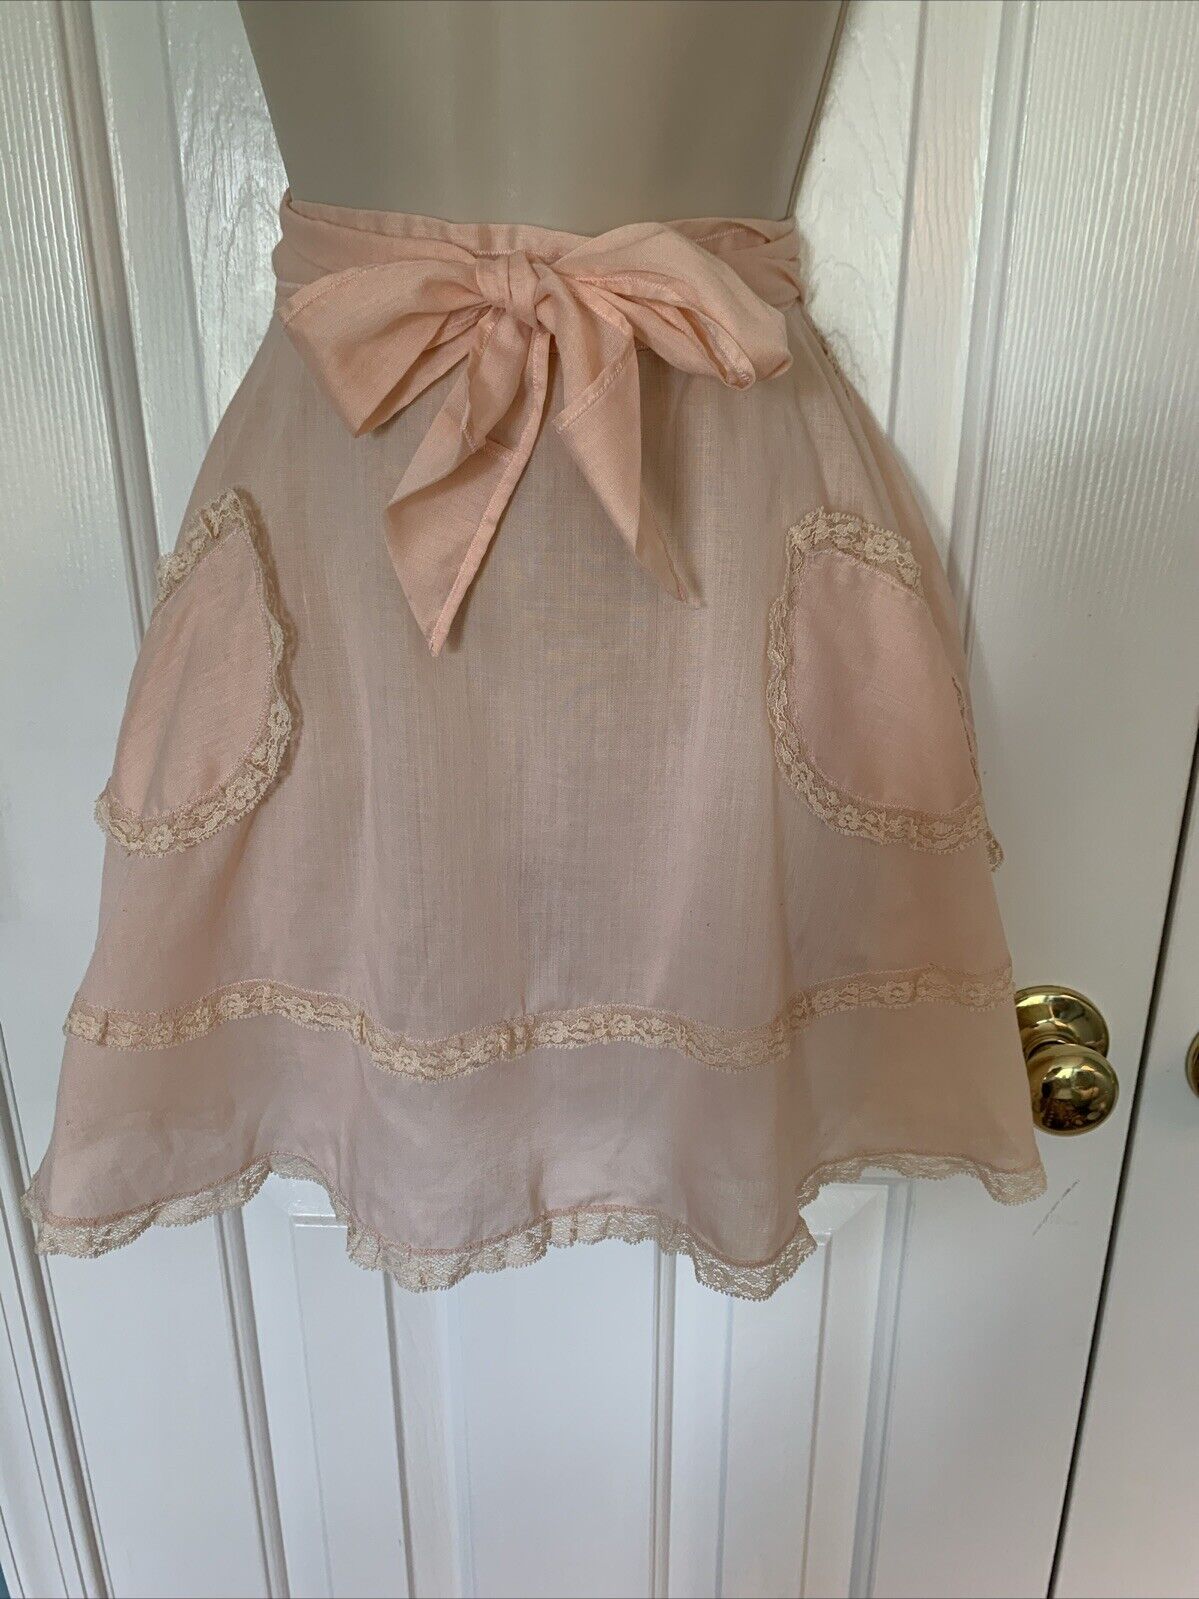 Vintage Half Apron Pink Sheer With Ivory Lace Trim And Two Lace Trim Pockets